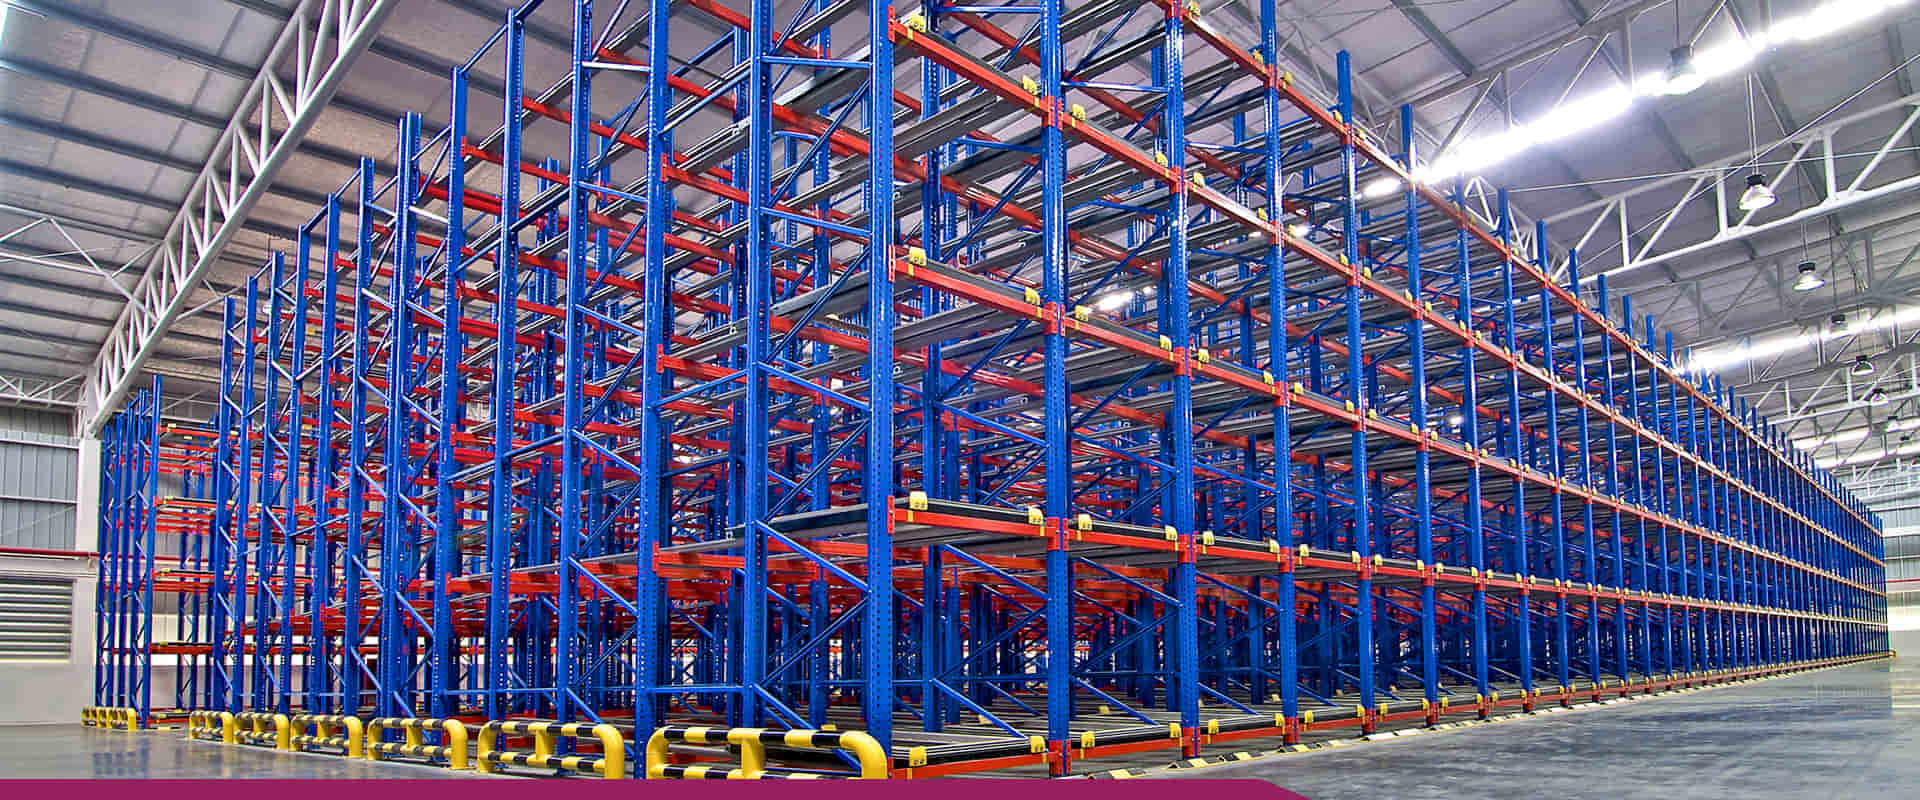 India’s Top Warehouse And Industrial Storage Racks Manufacturer In Allahabad